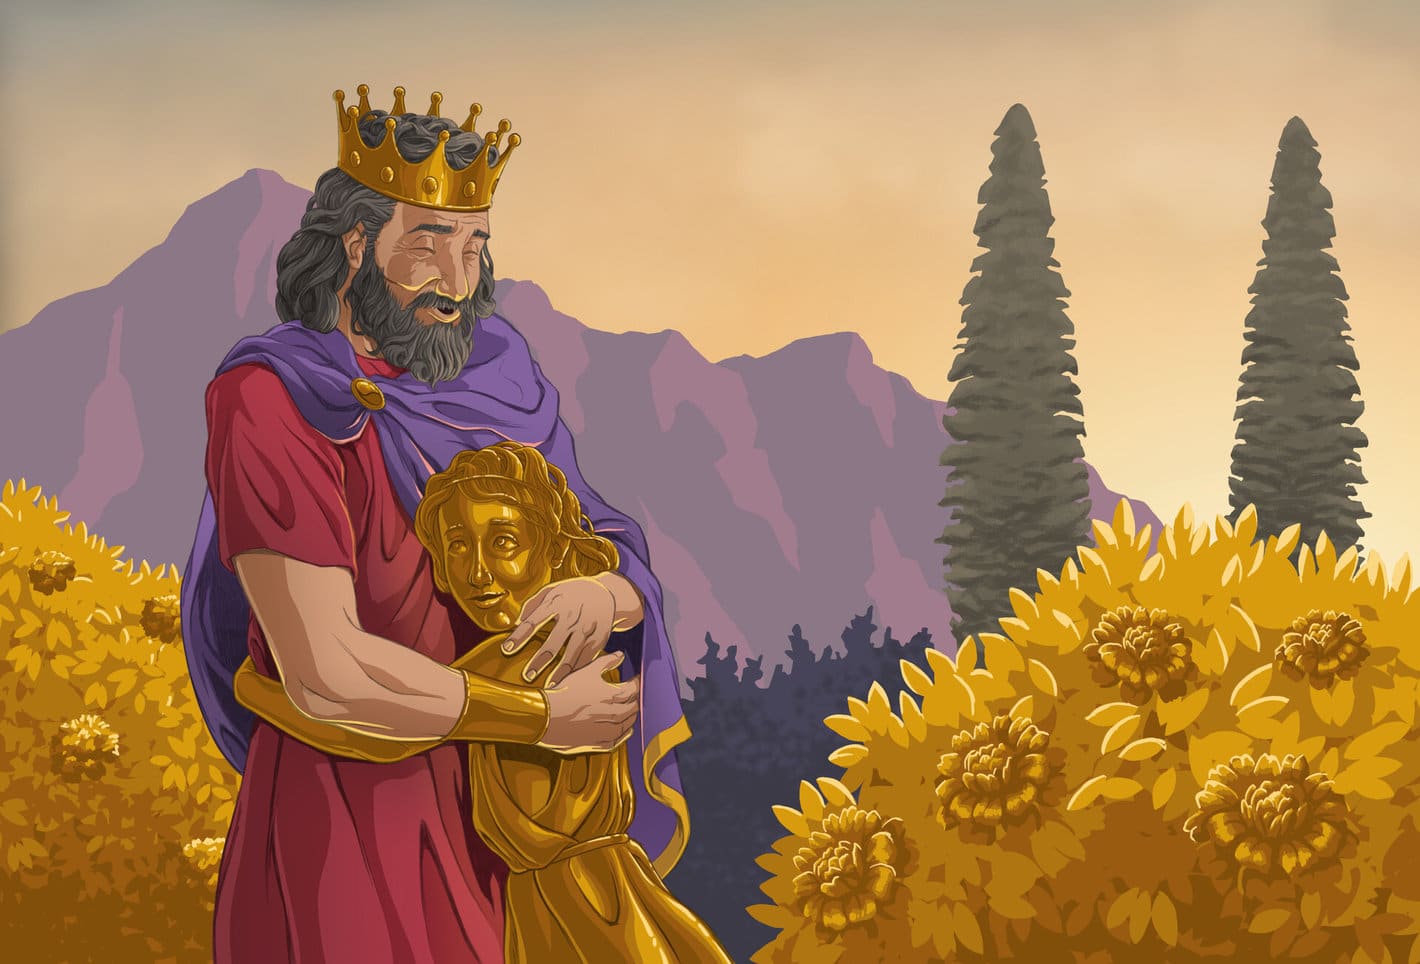 King Midas and the Golden touch – The Mythology Project